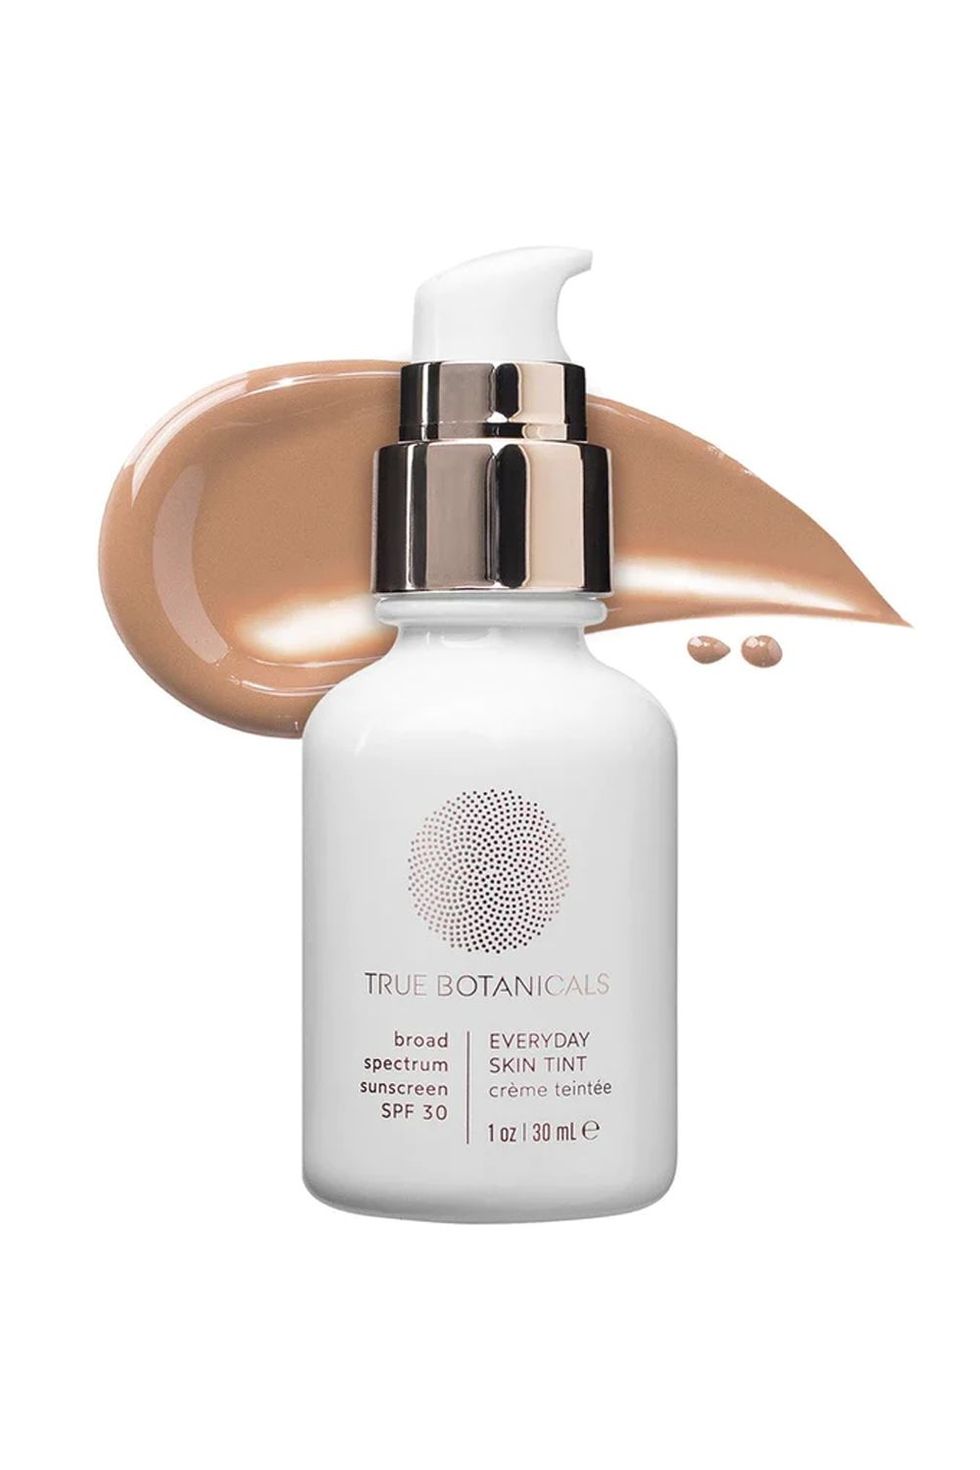 15 Best Tinted Moisturizers for Every Skin Type in 2022